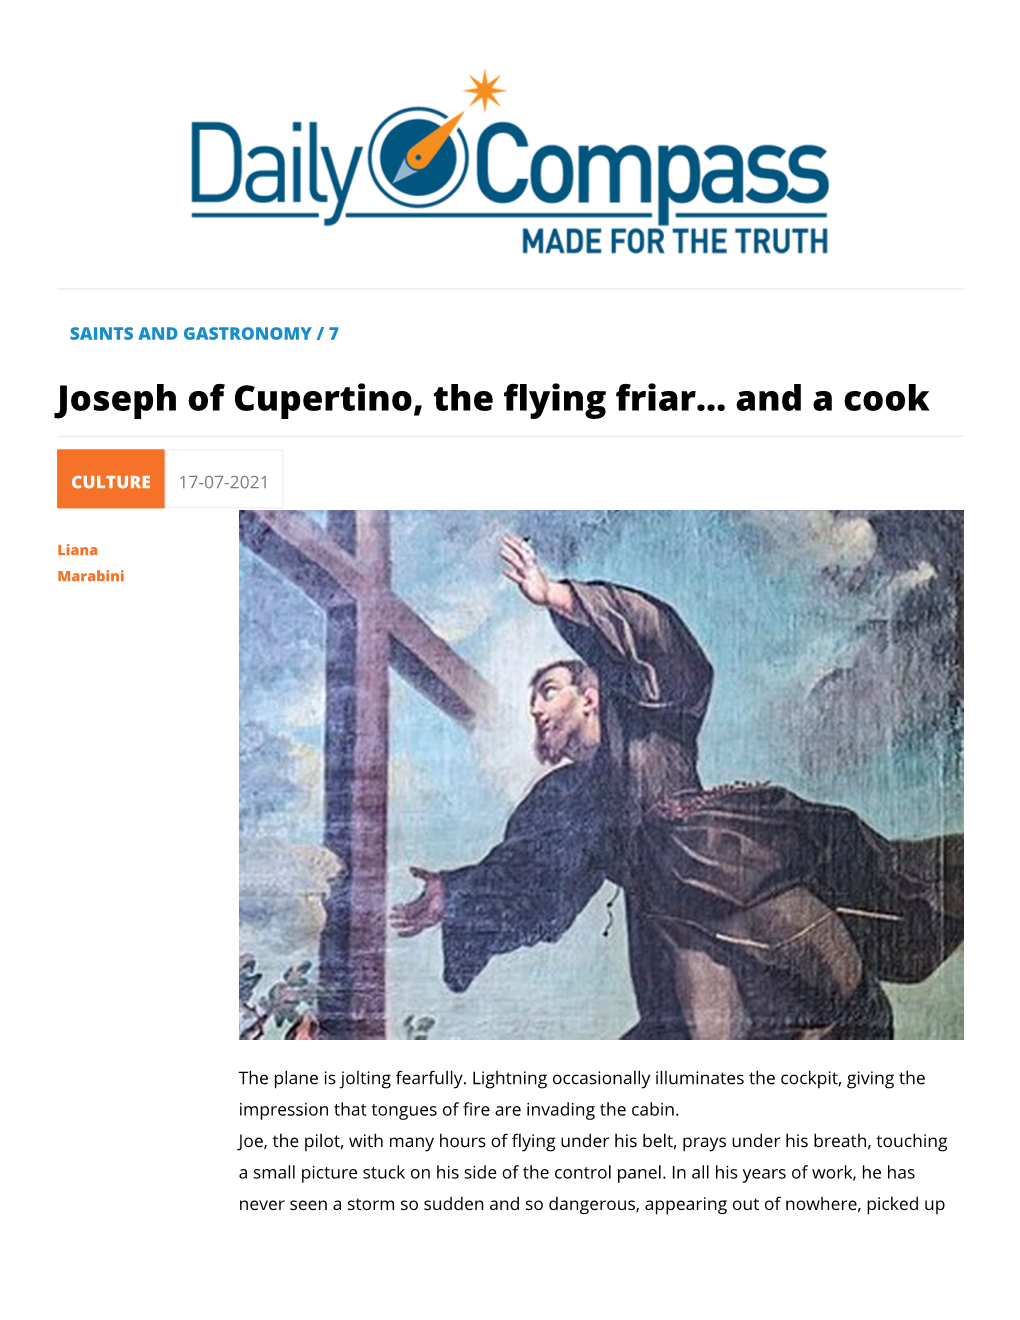 Joseph of Cupertino, the Flying Friar... and a Cook